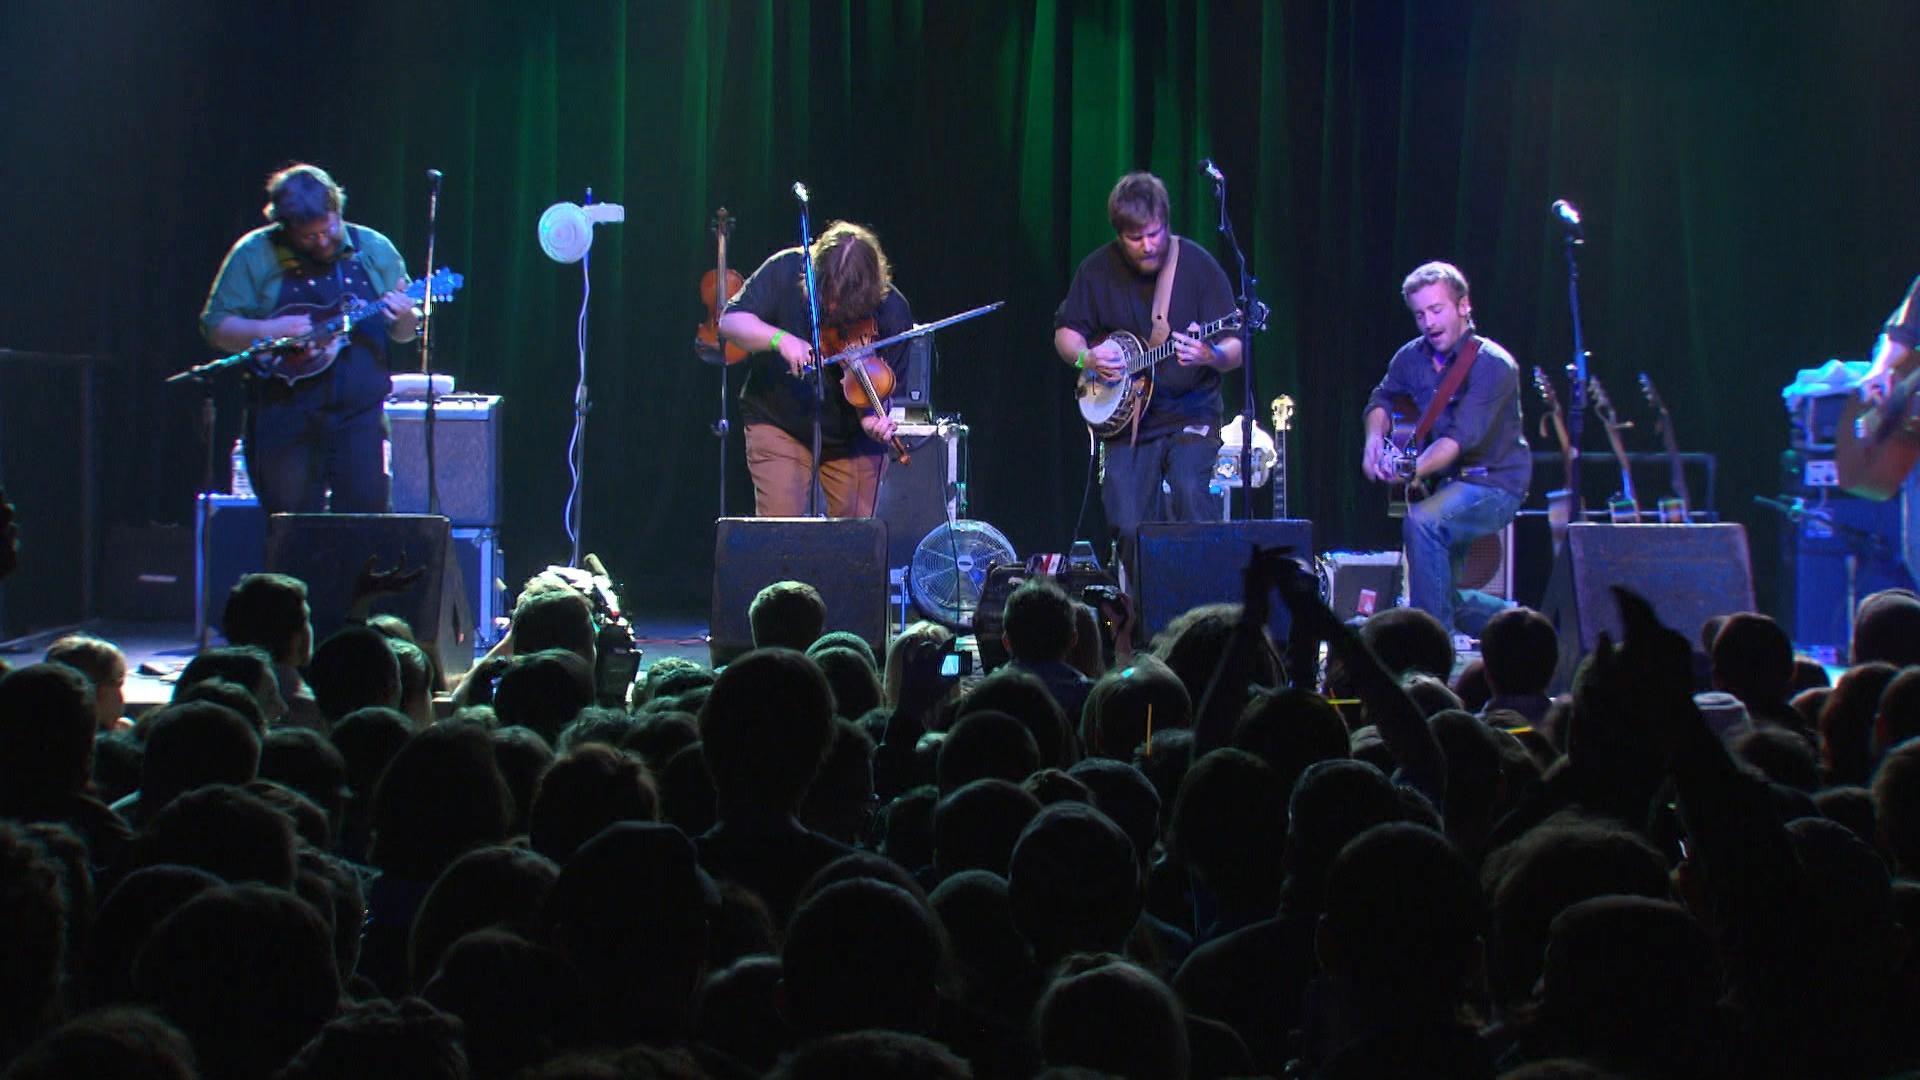 Trampled by Turtles: It's A War